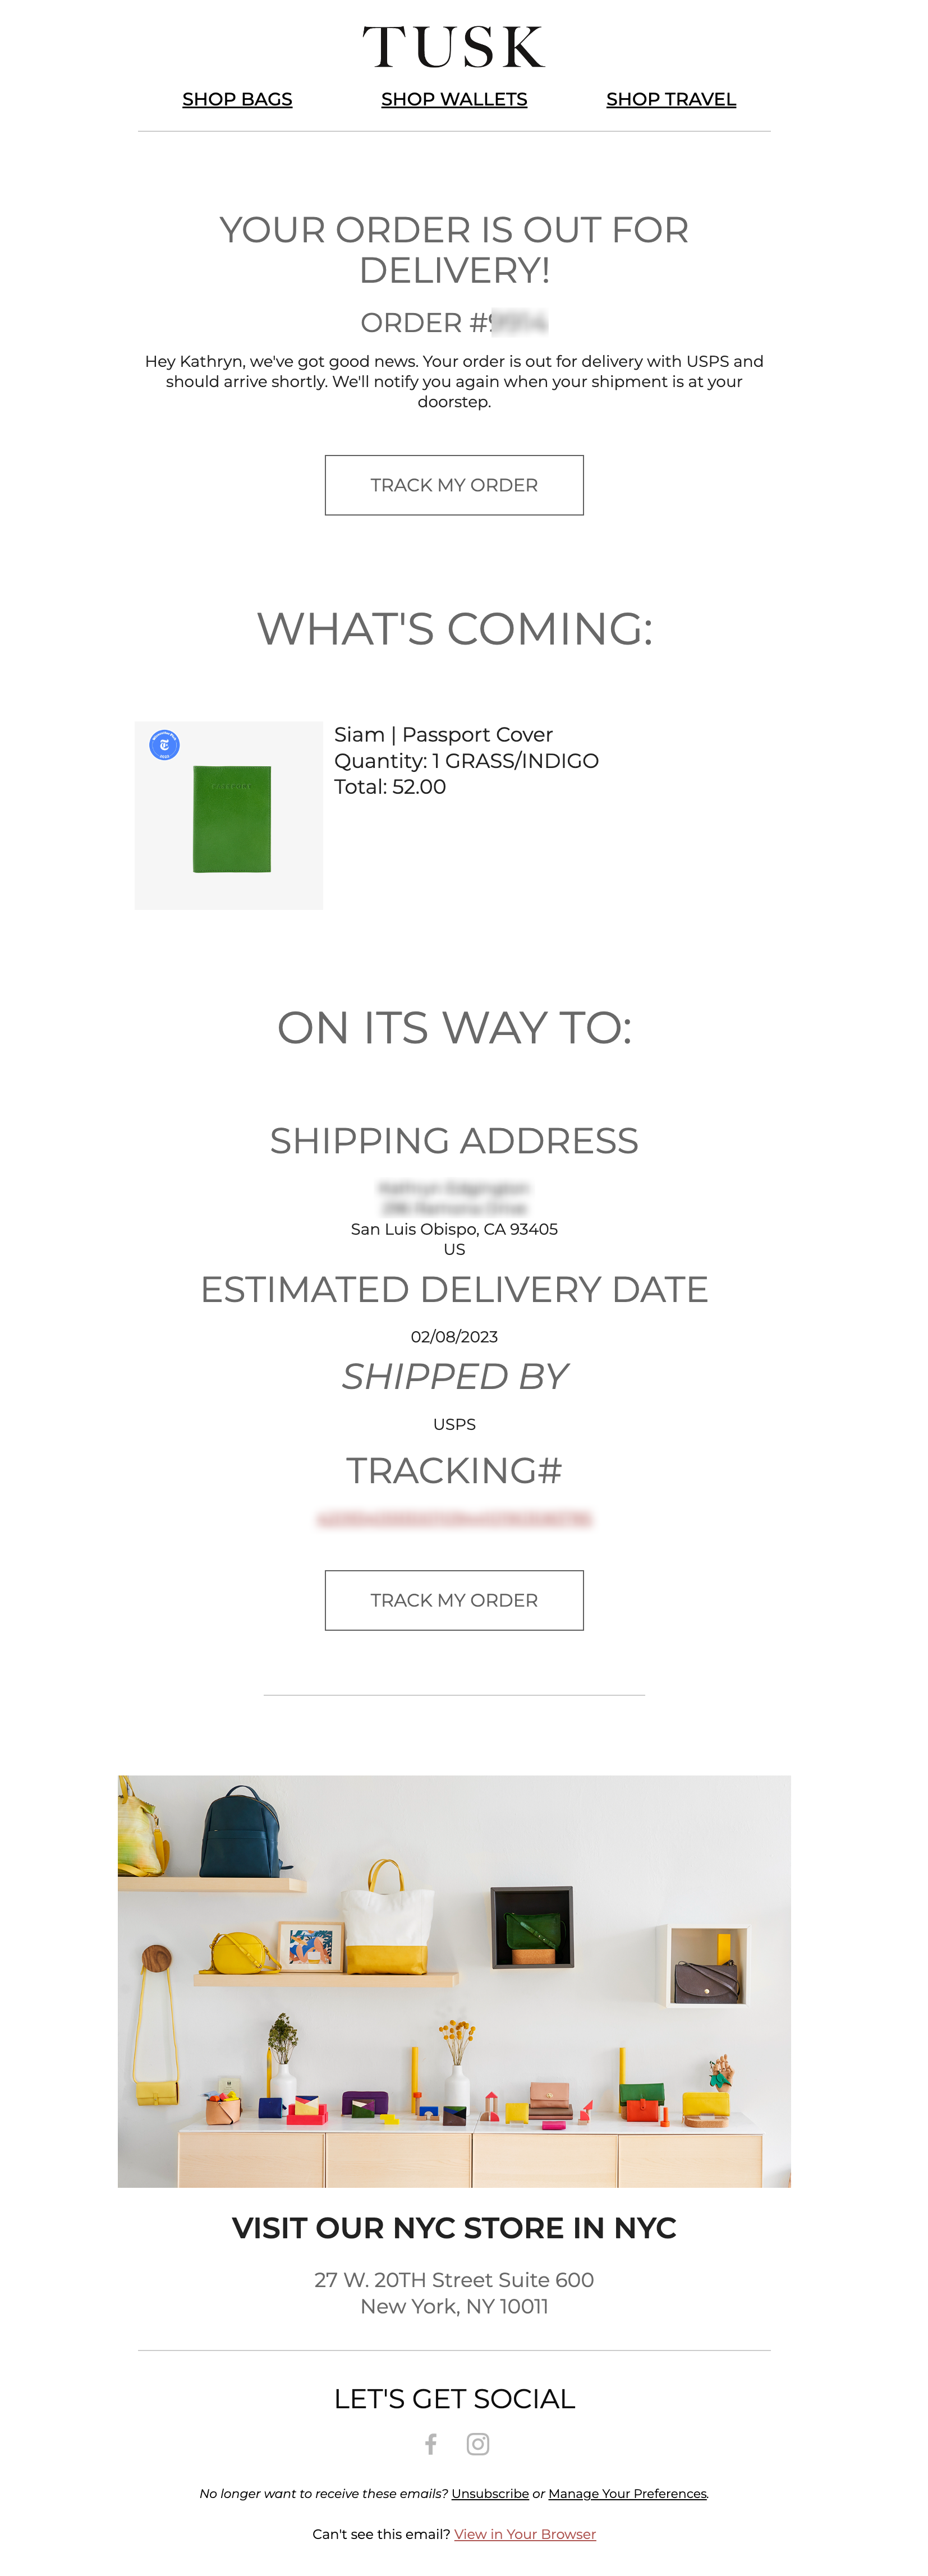 Tusk Out for Delivery Notification Industry Email Template screenshot